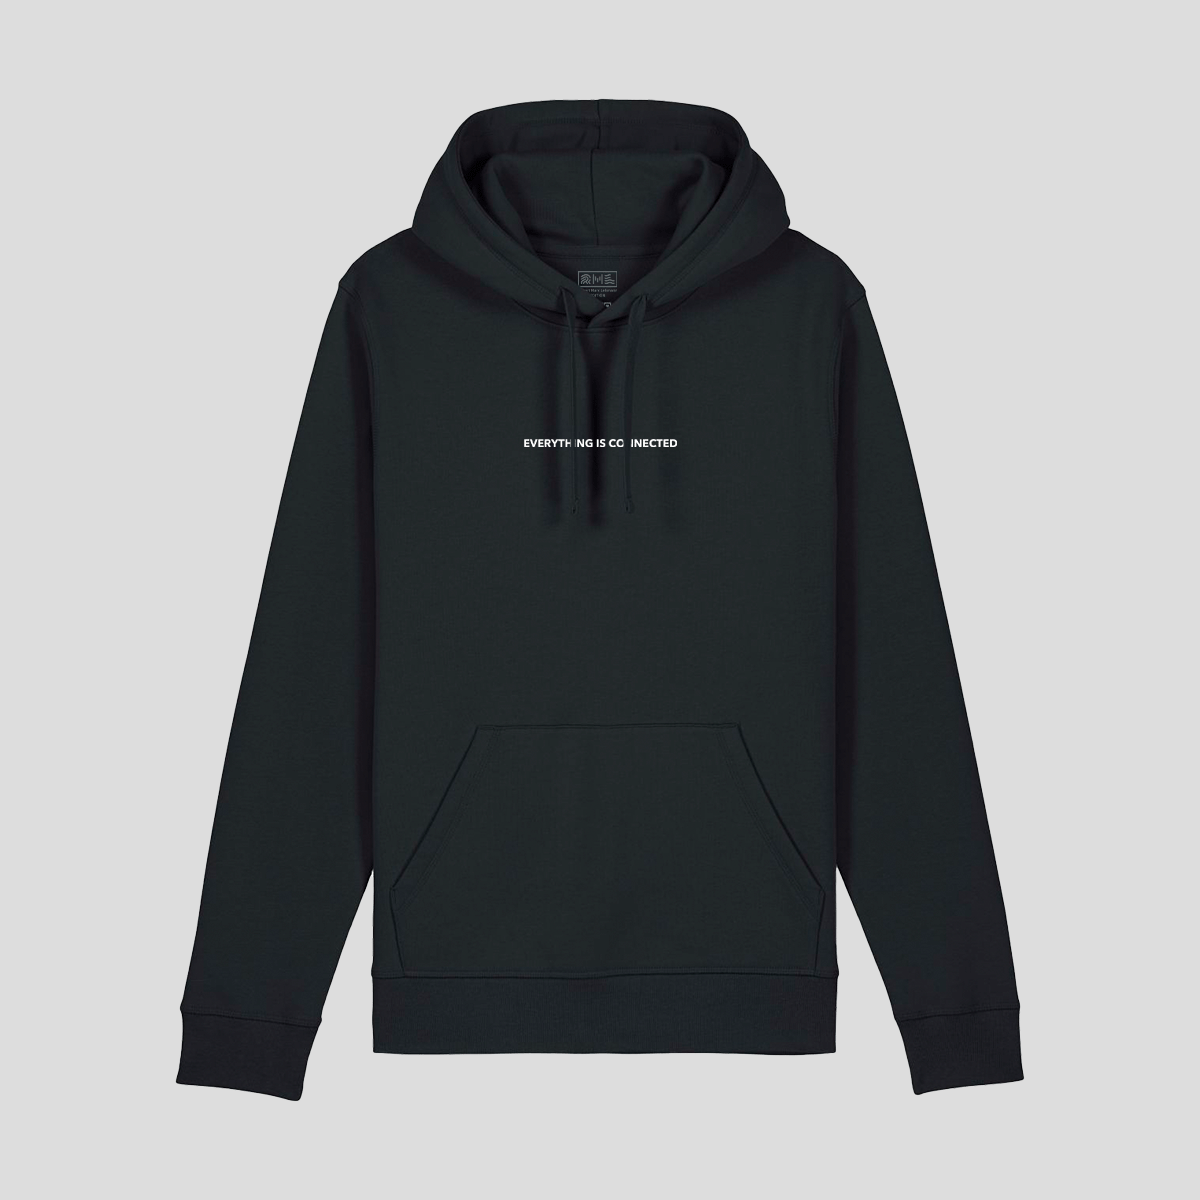 Hoodie "Everything is connected"